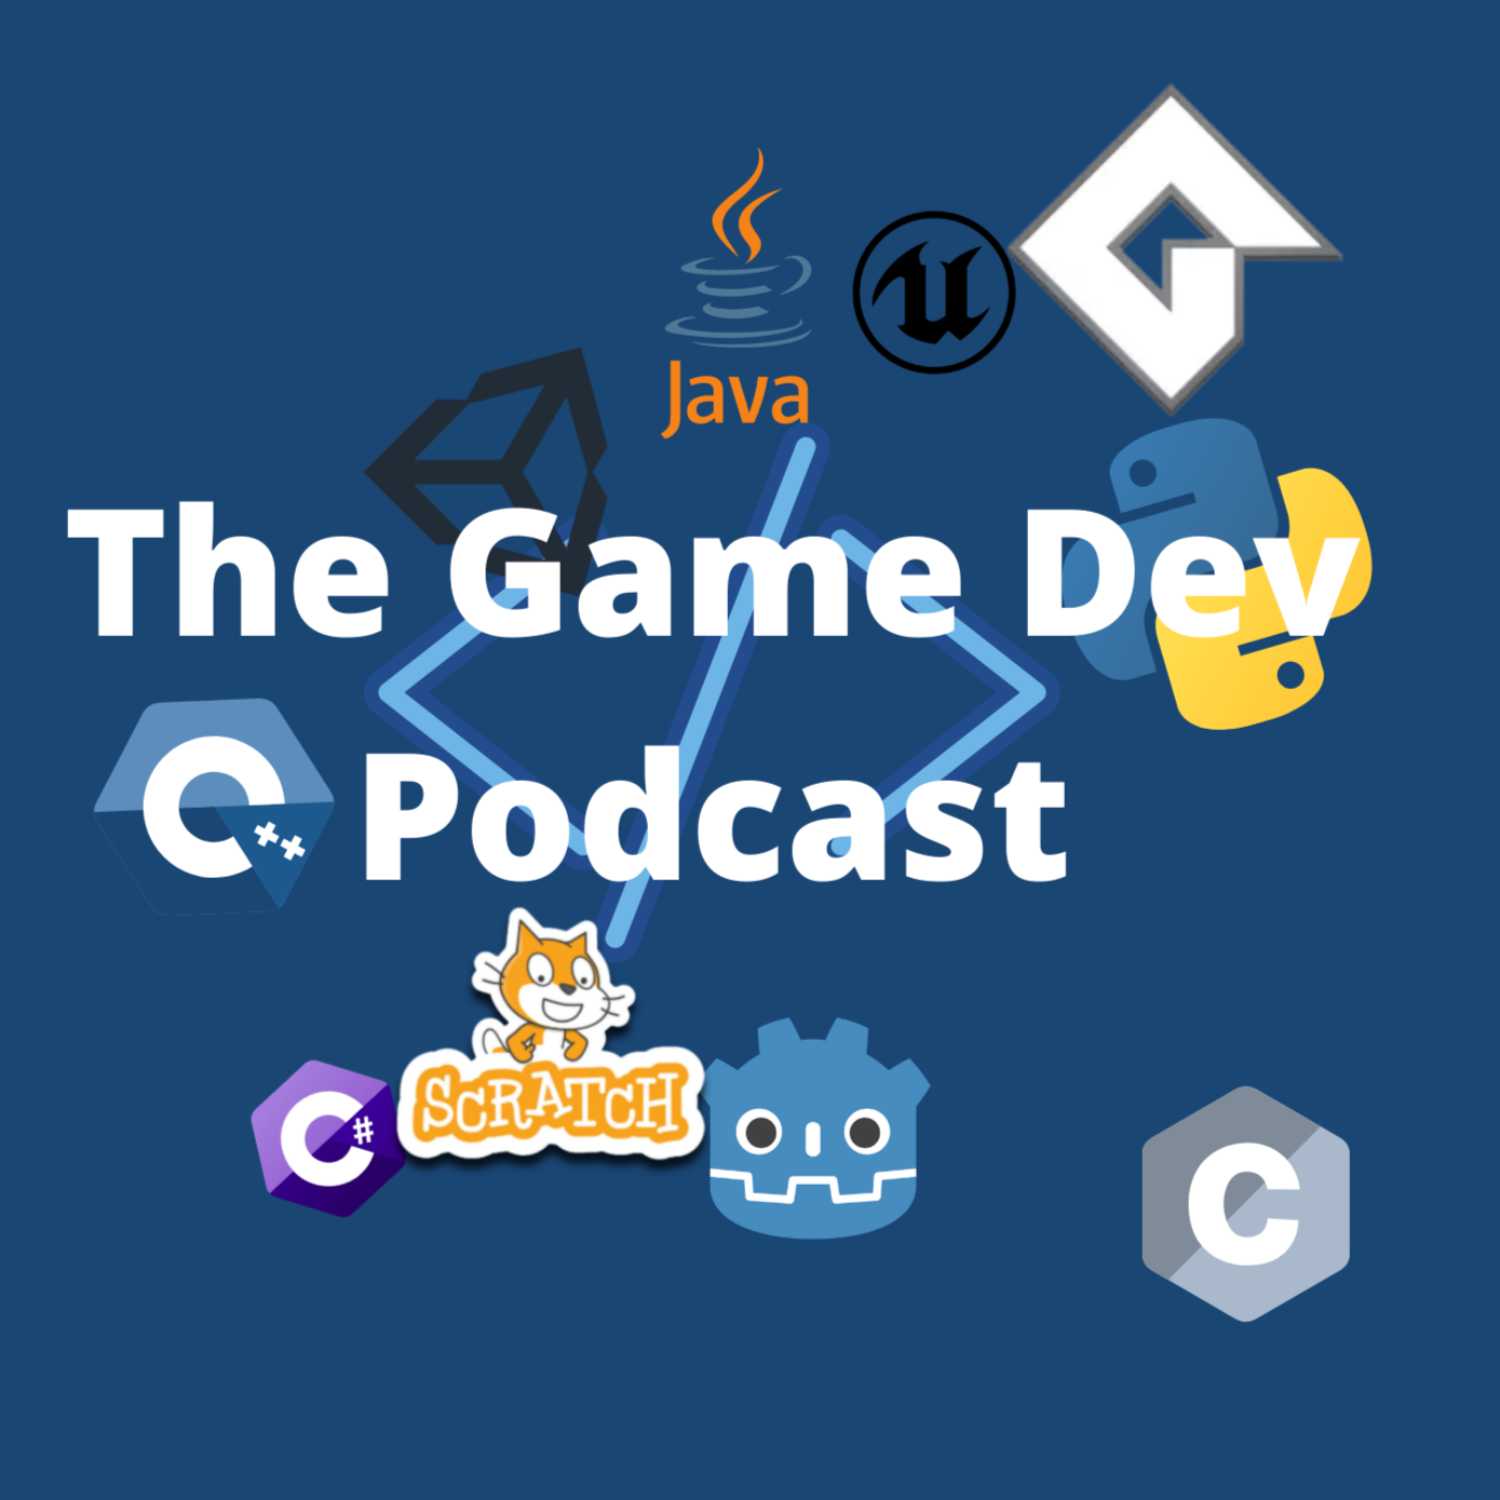 The Game Dev Podcast